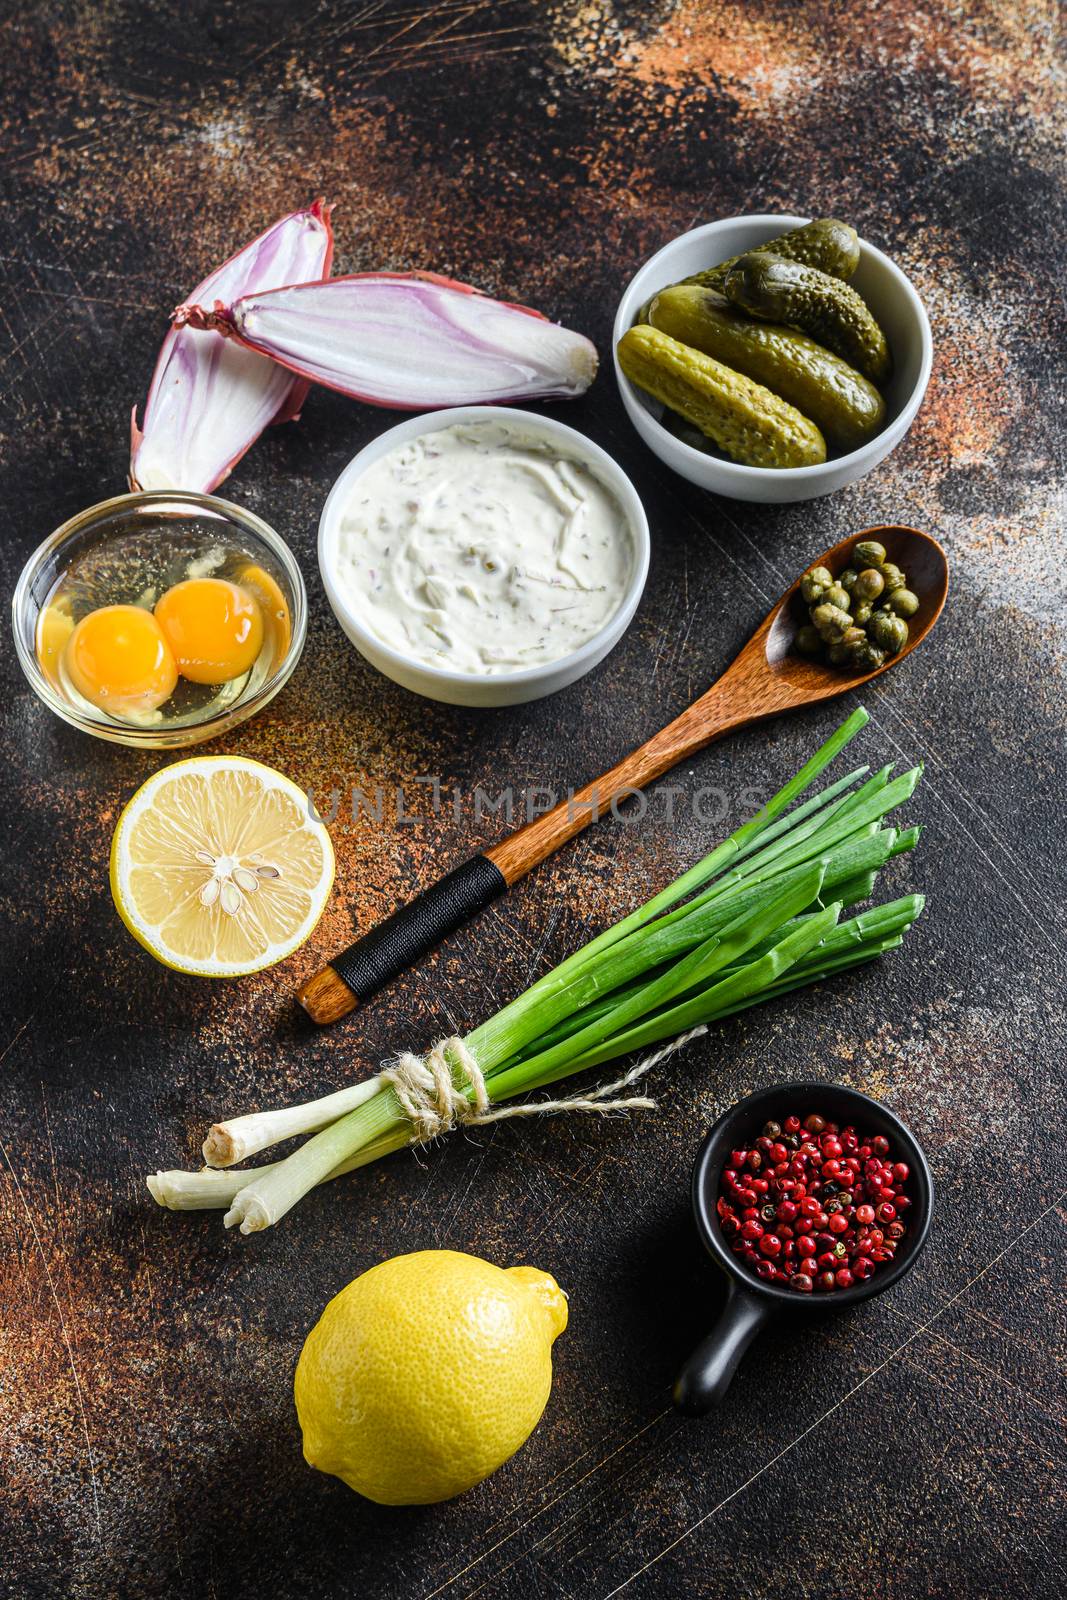 Ingredient tartar sauce organic mayonnaise, lemon,capers,parsley,dill,onion and various herbs. Over old rustic metall background Top view vertical.